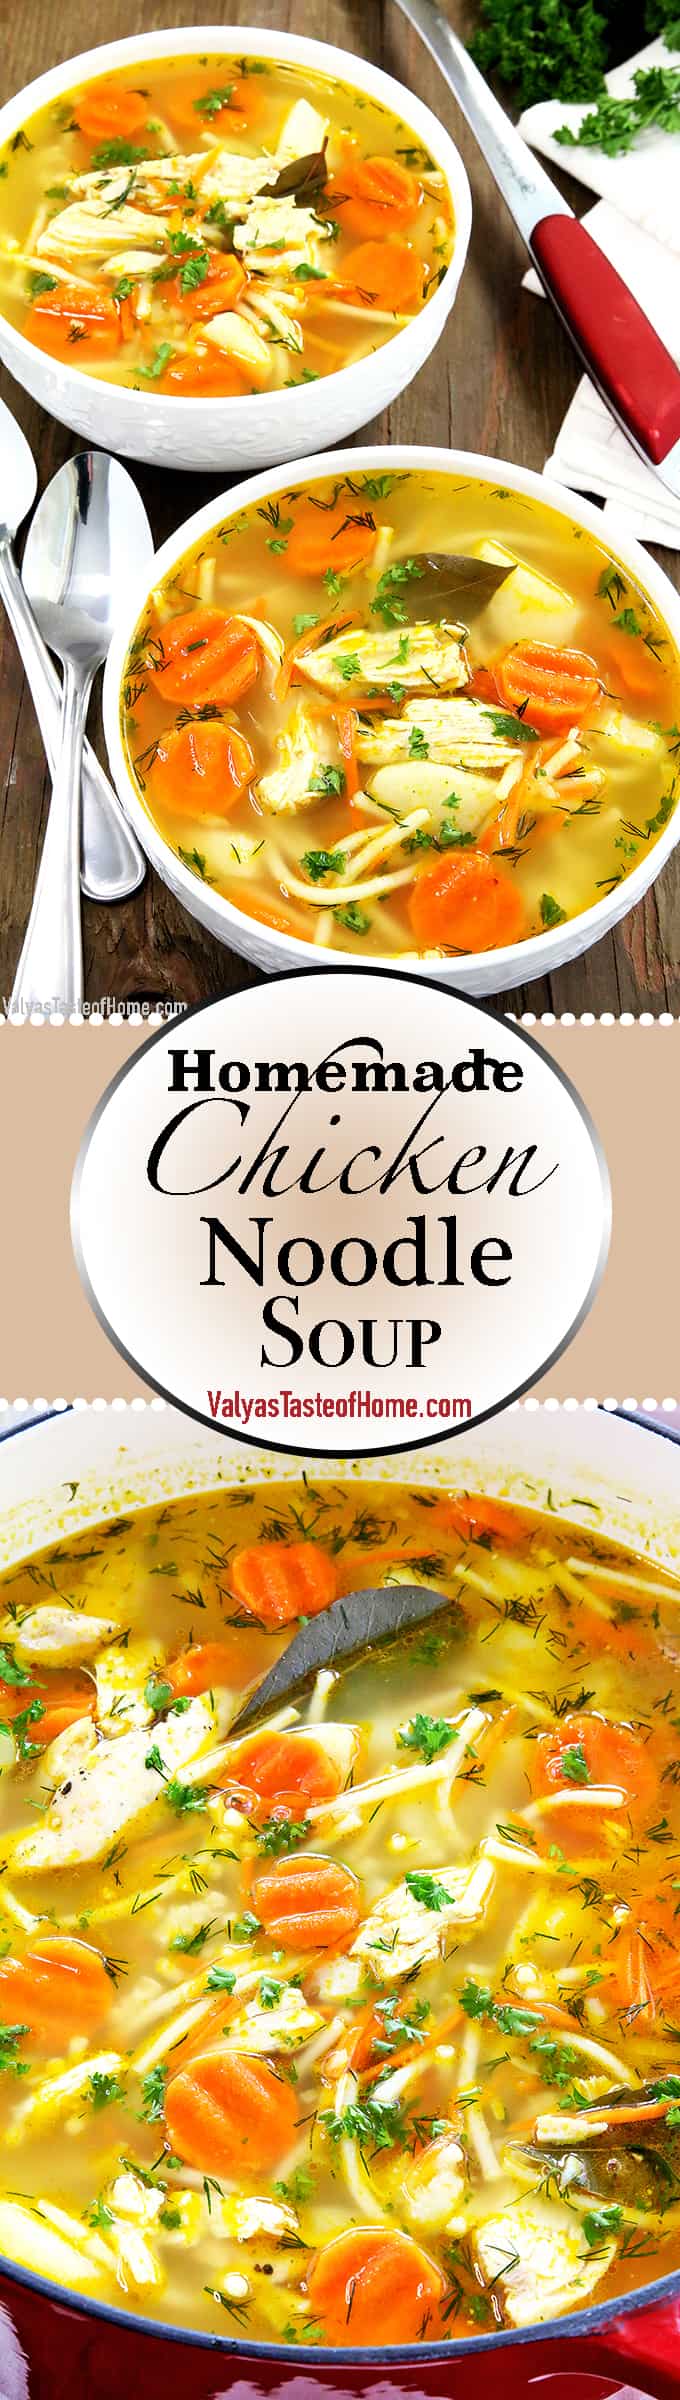 What can be better than a hot bowl of Homemade Chicken Noodle Soup on a chilly Fall day? Ok, maybe a weekend, plus this savory soup, plus a crisp and colorful fall day. #chickennoodlesoup #homemadechickennoodlesoup #familyfavorite #comfortfoods